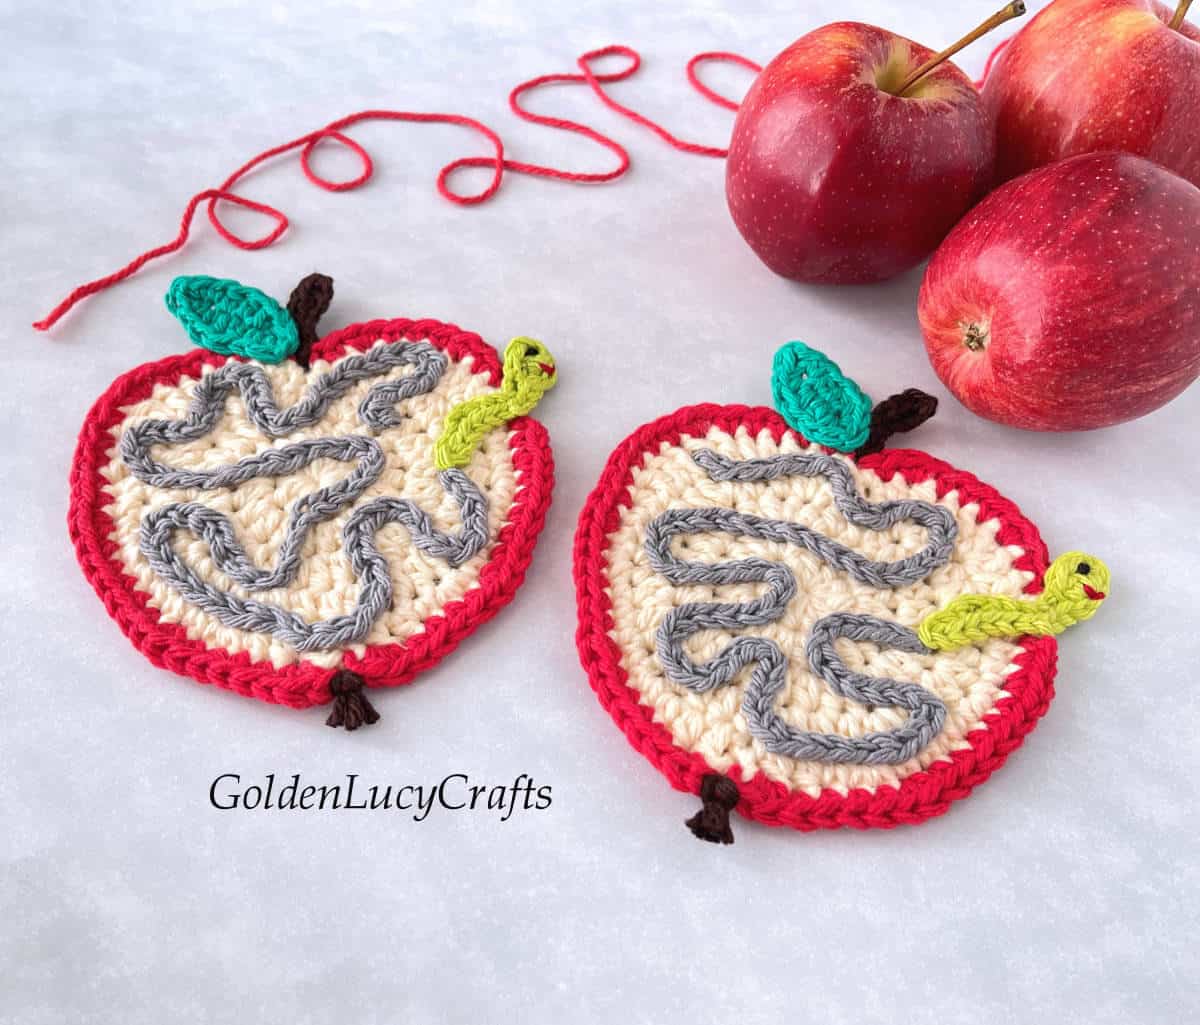 Two crocheted apple with worm coasters.